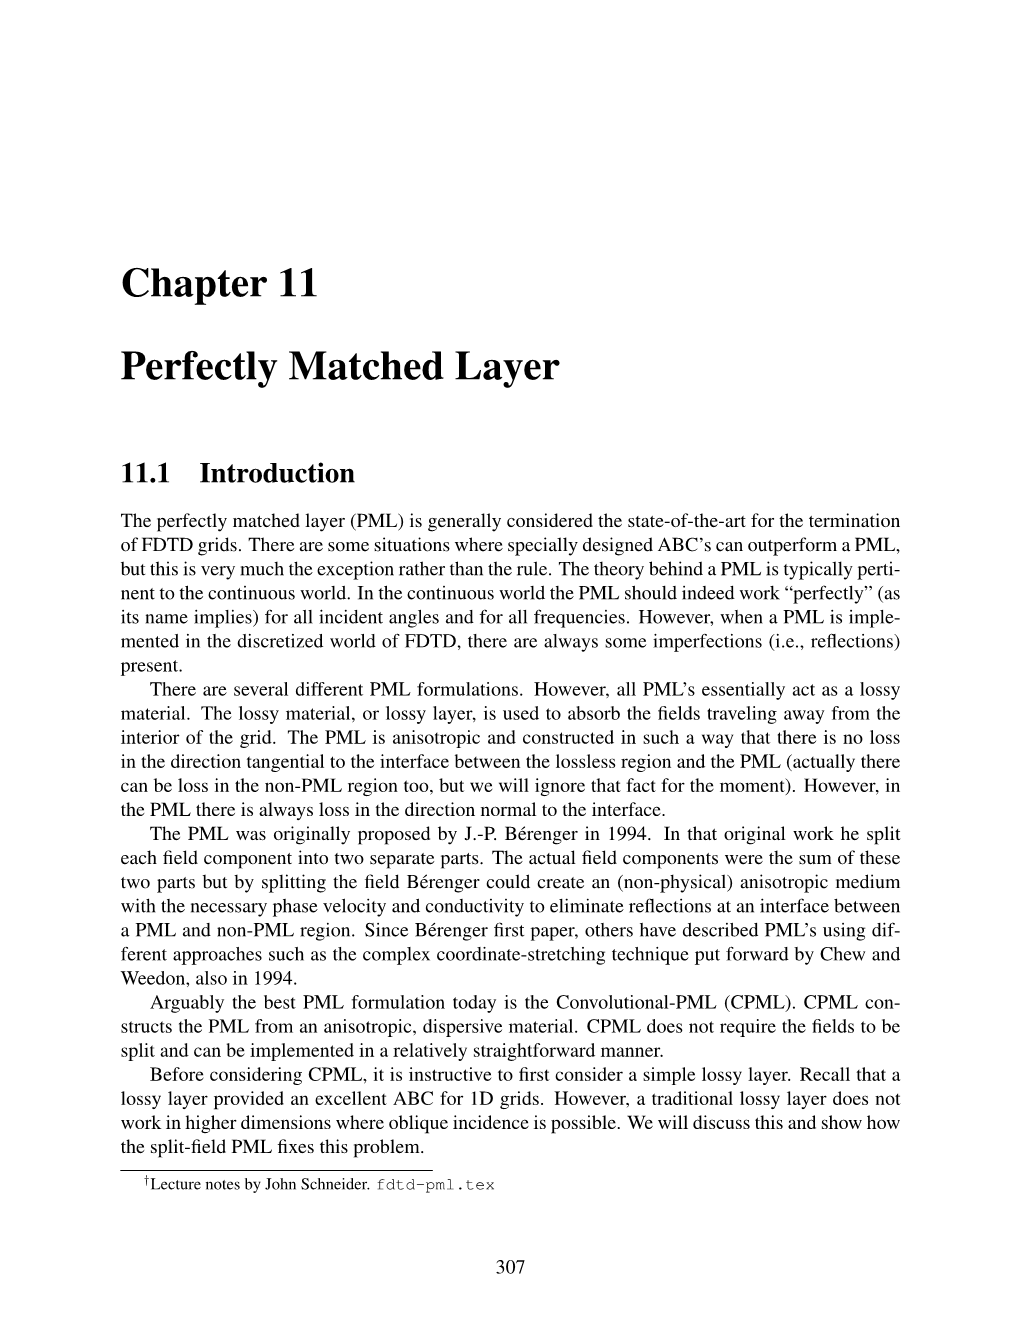 Chapter 11 Perfectly Matched Layer